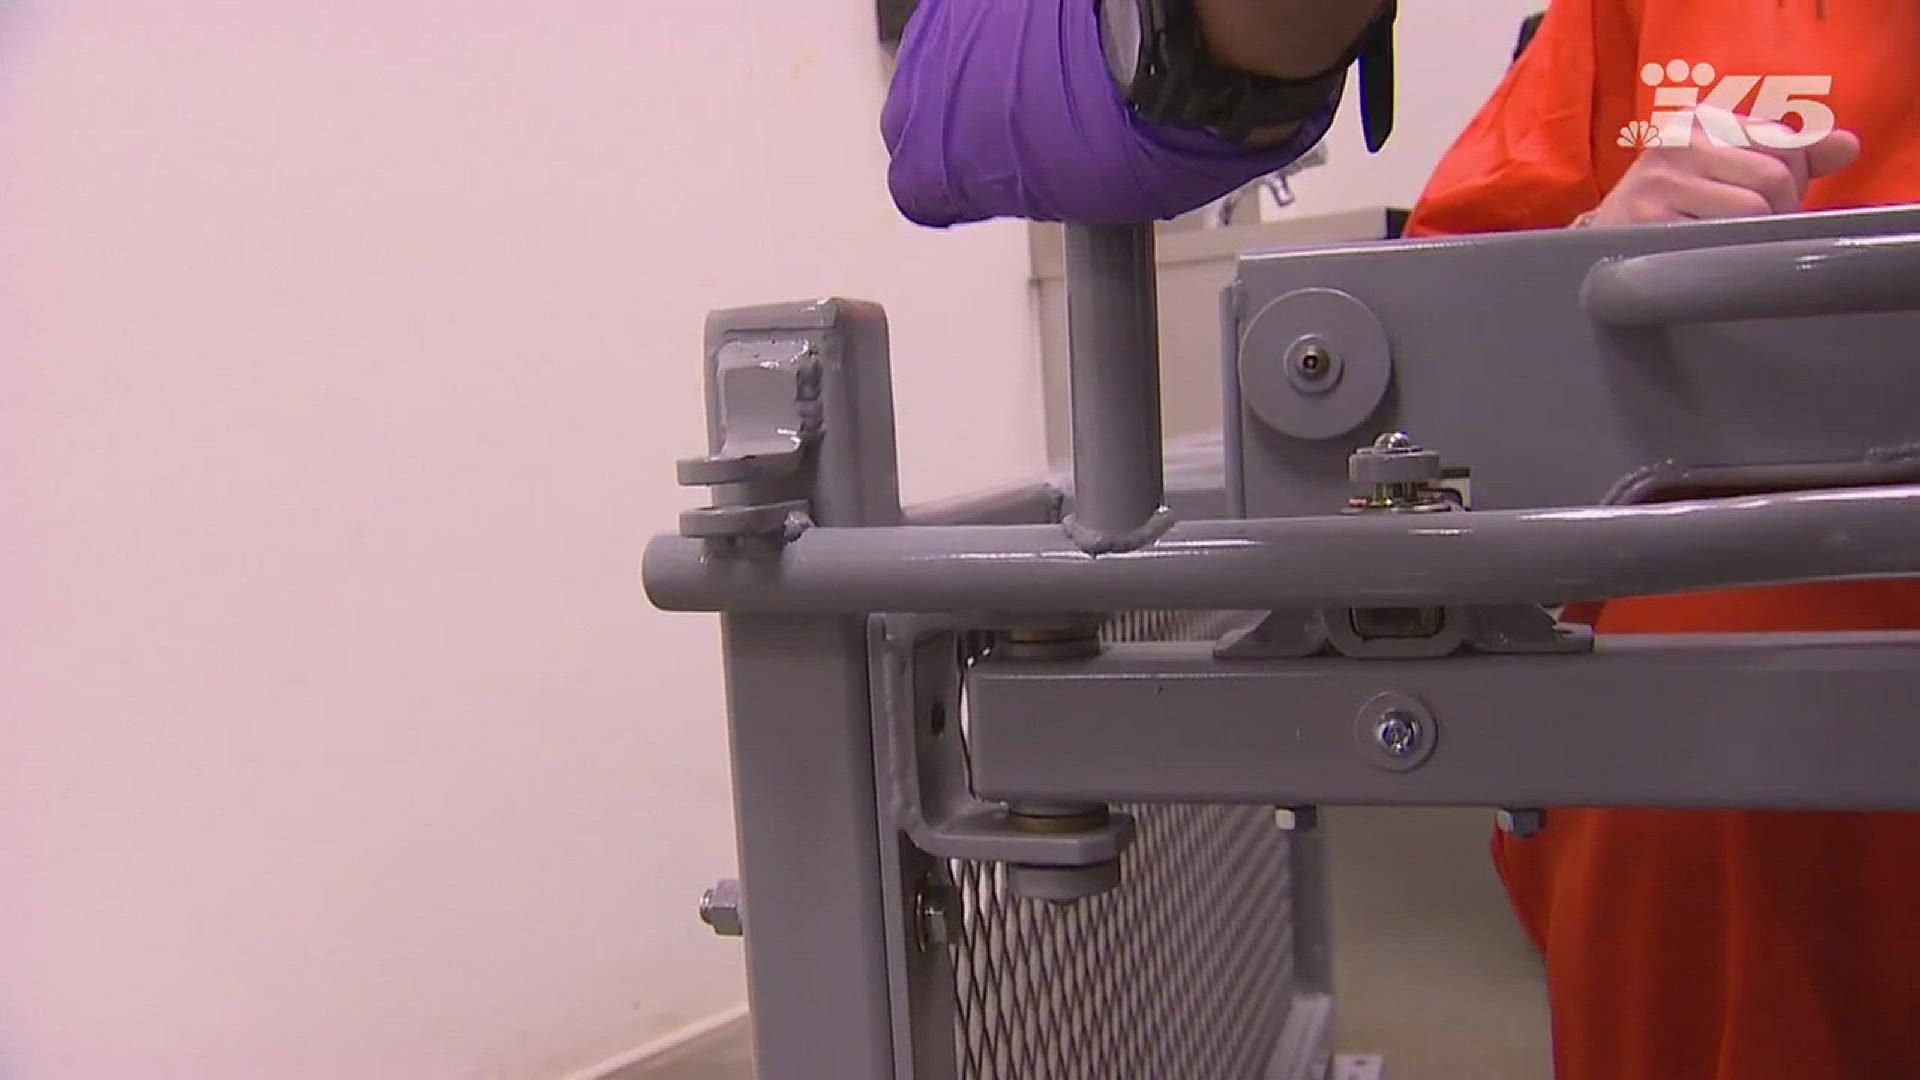 Inmates share why they believe restraint chairs have helped them in prison.